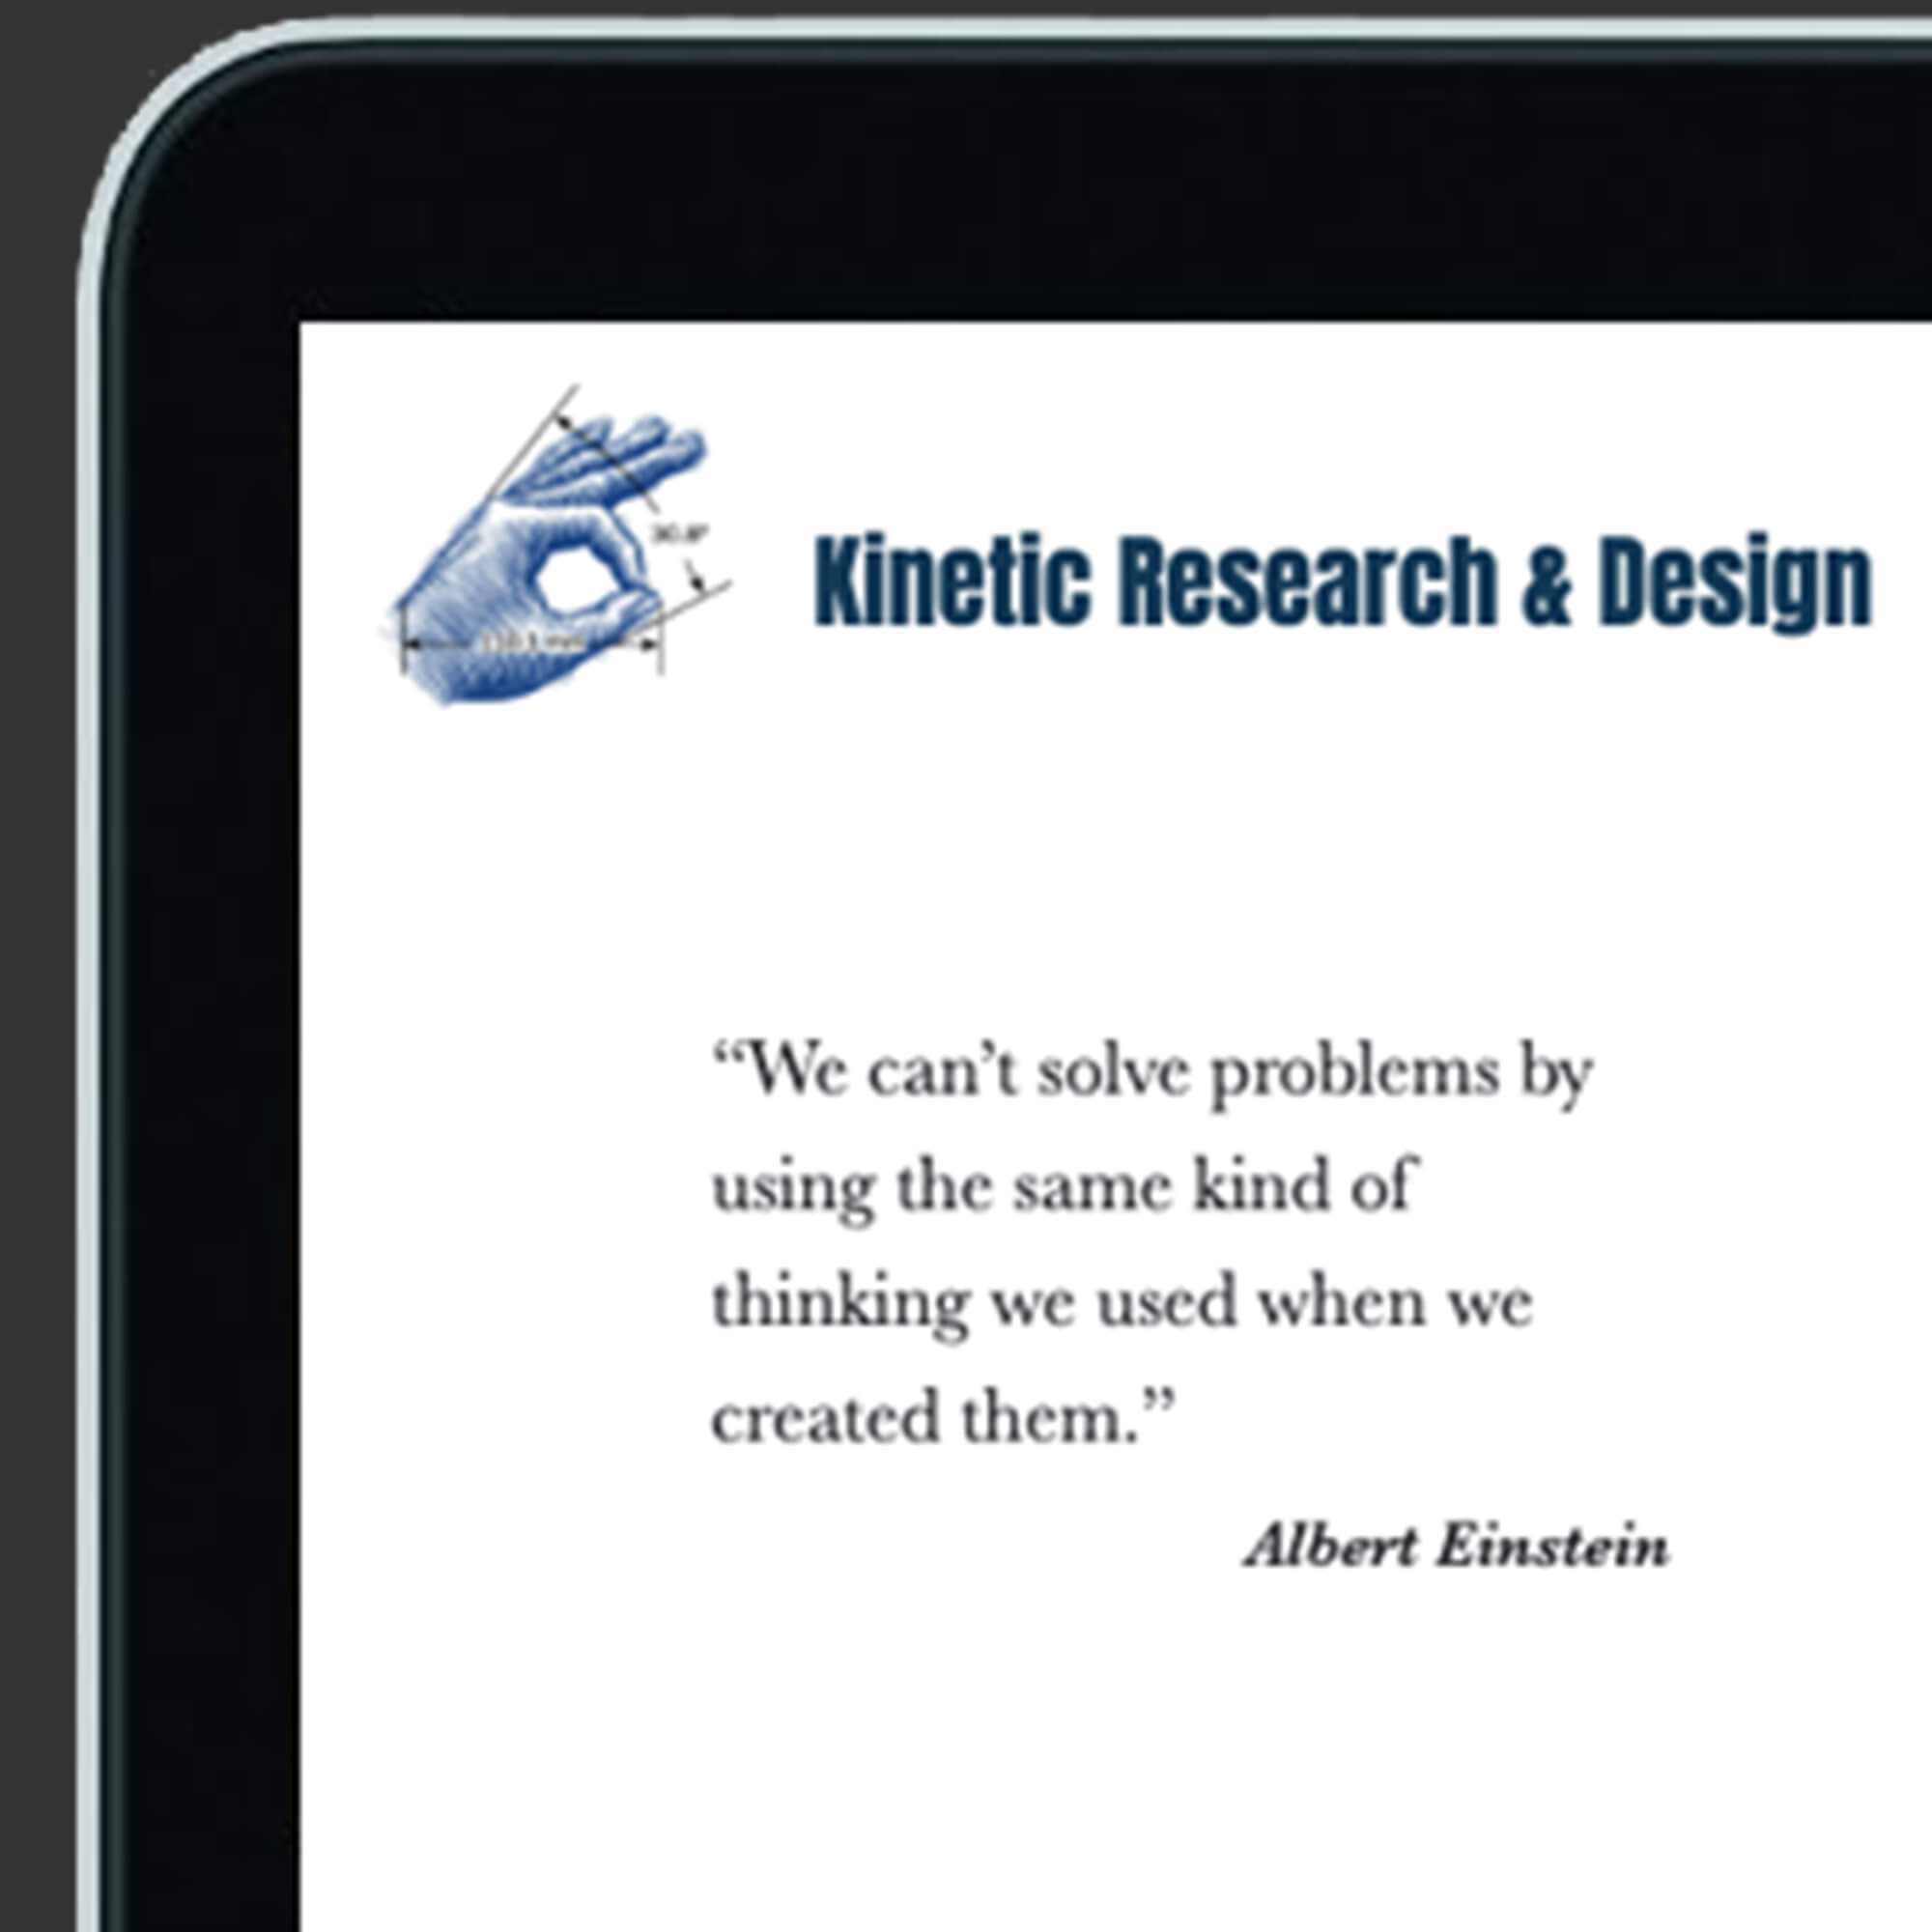 See my work for Kinetic Research & Design